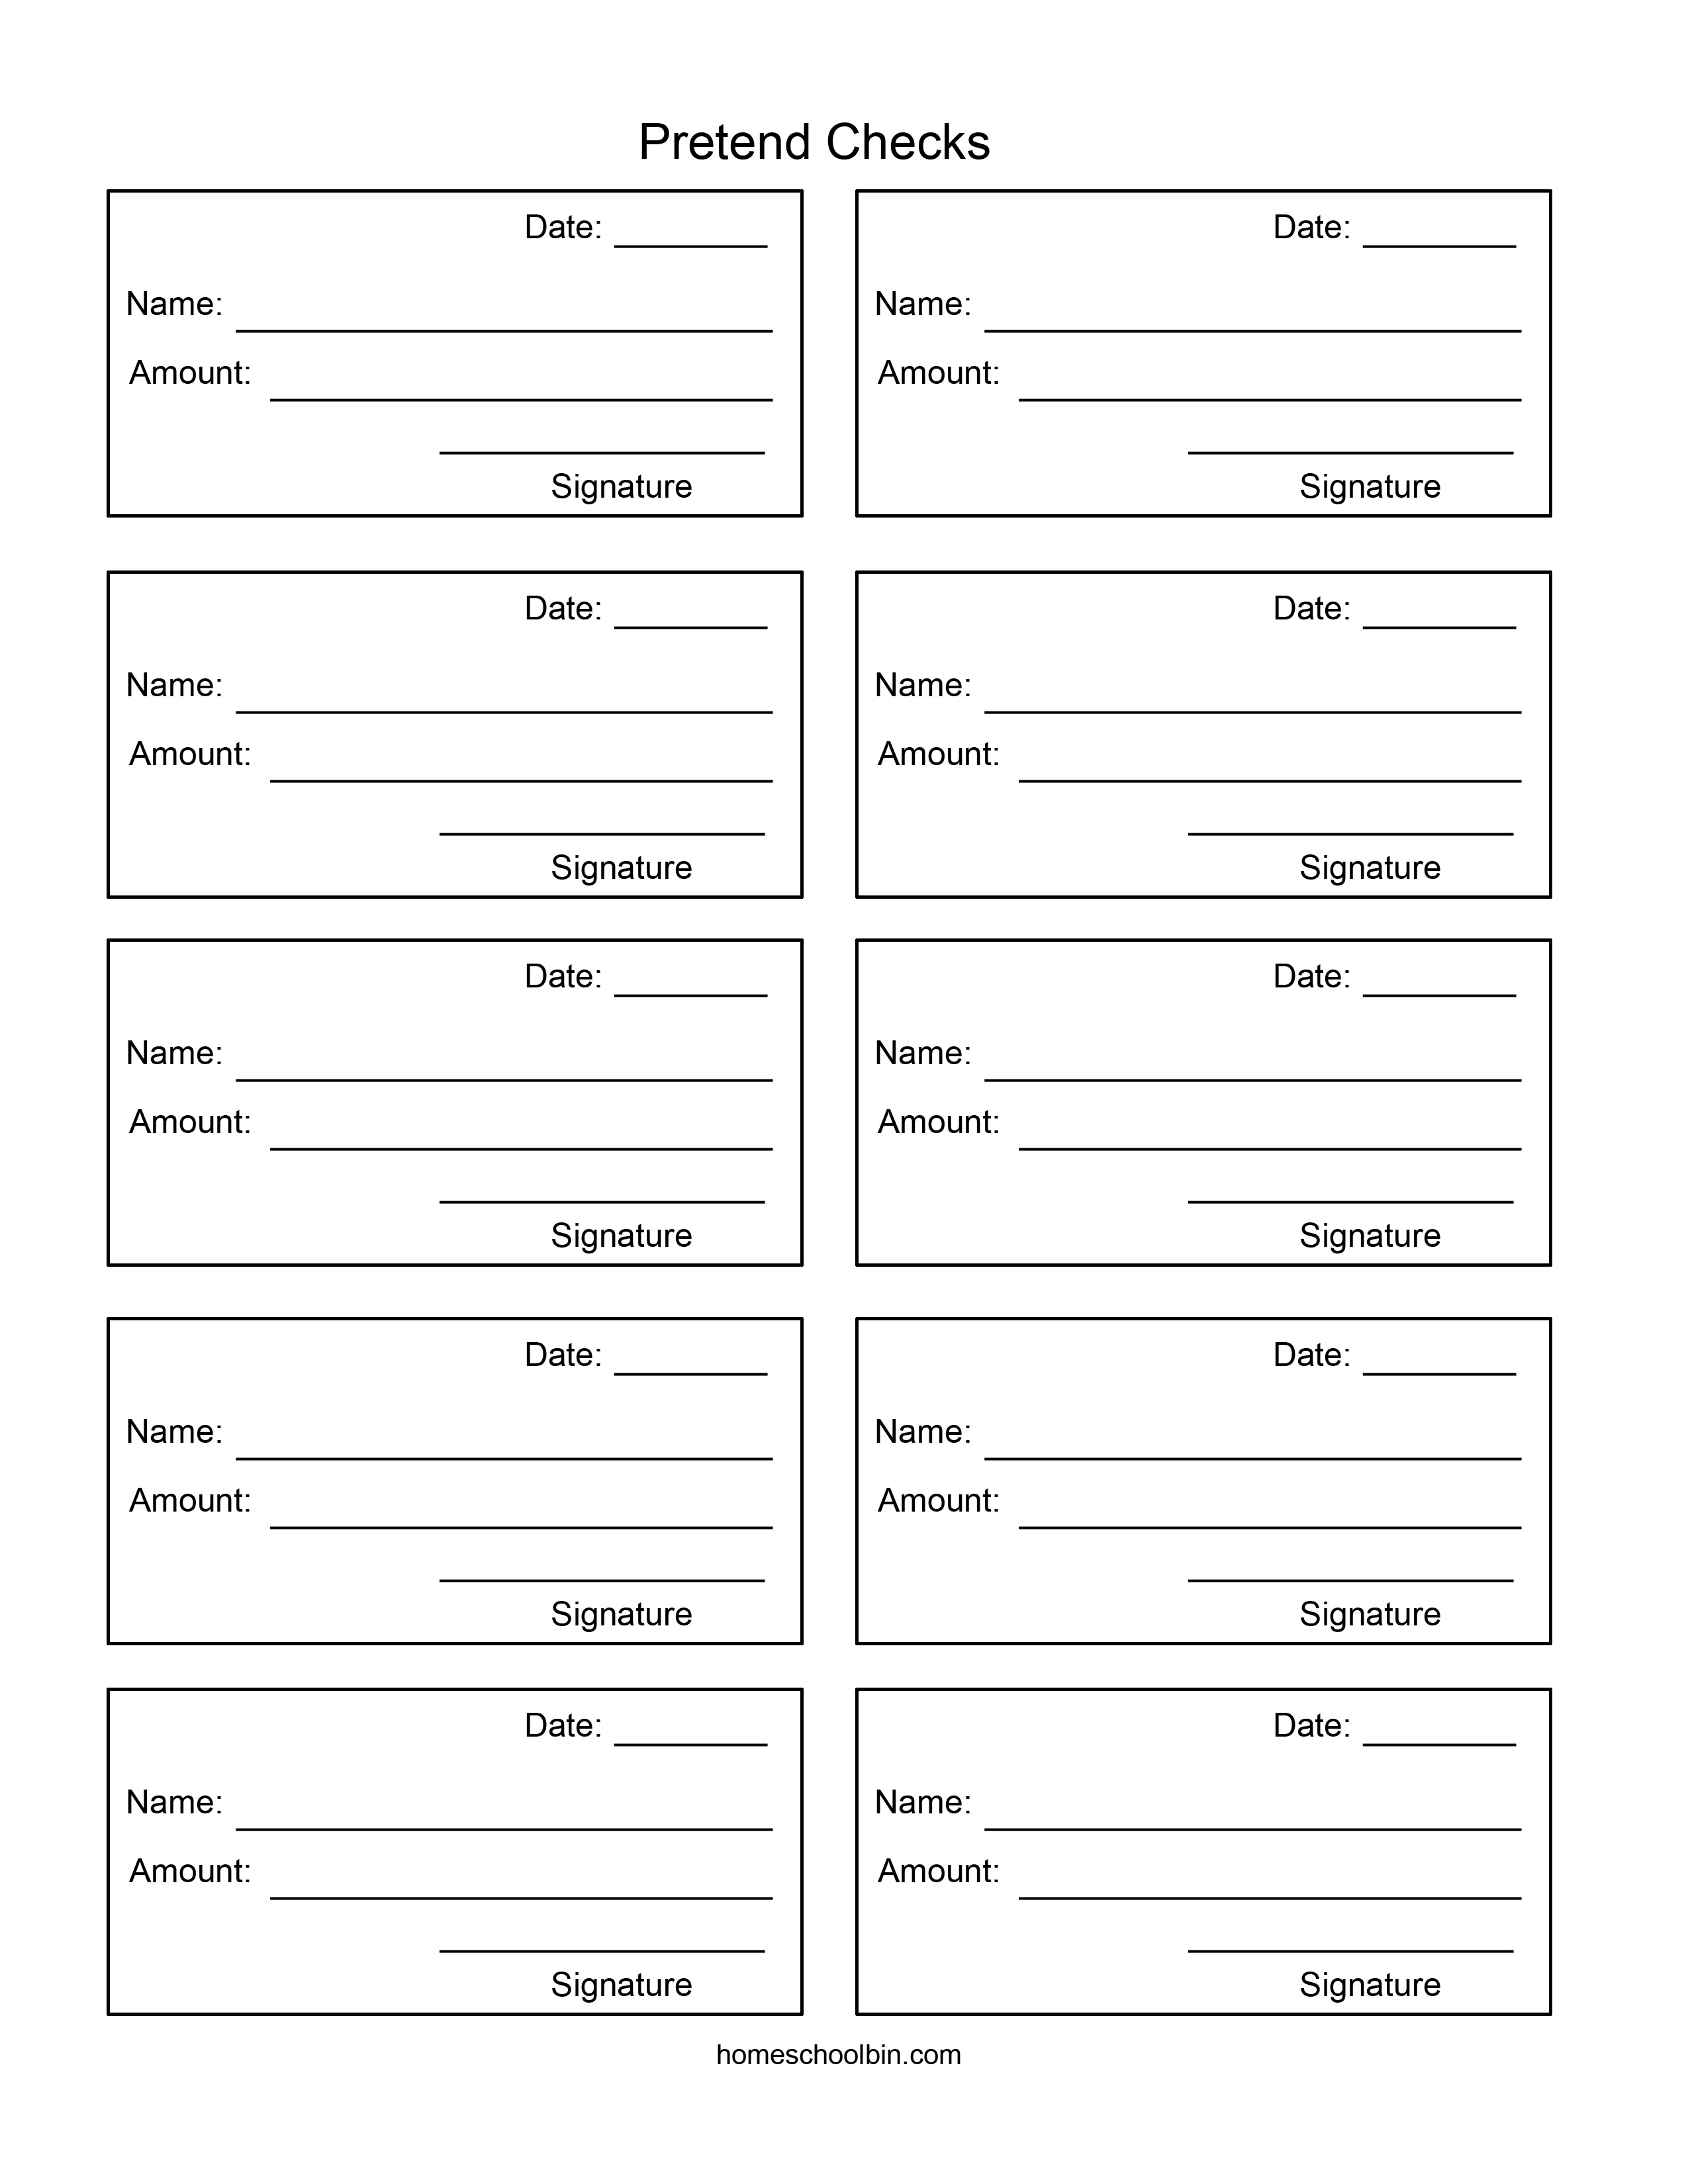 6-best-images-of-personalized-printable-play-checks-kids-blank-check